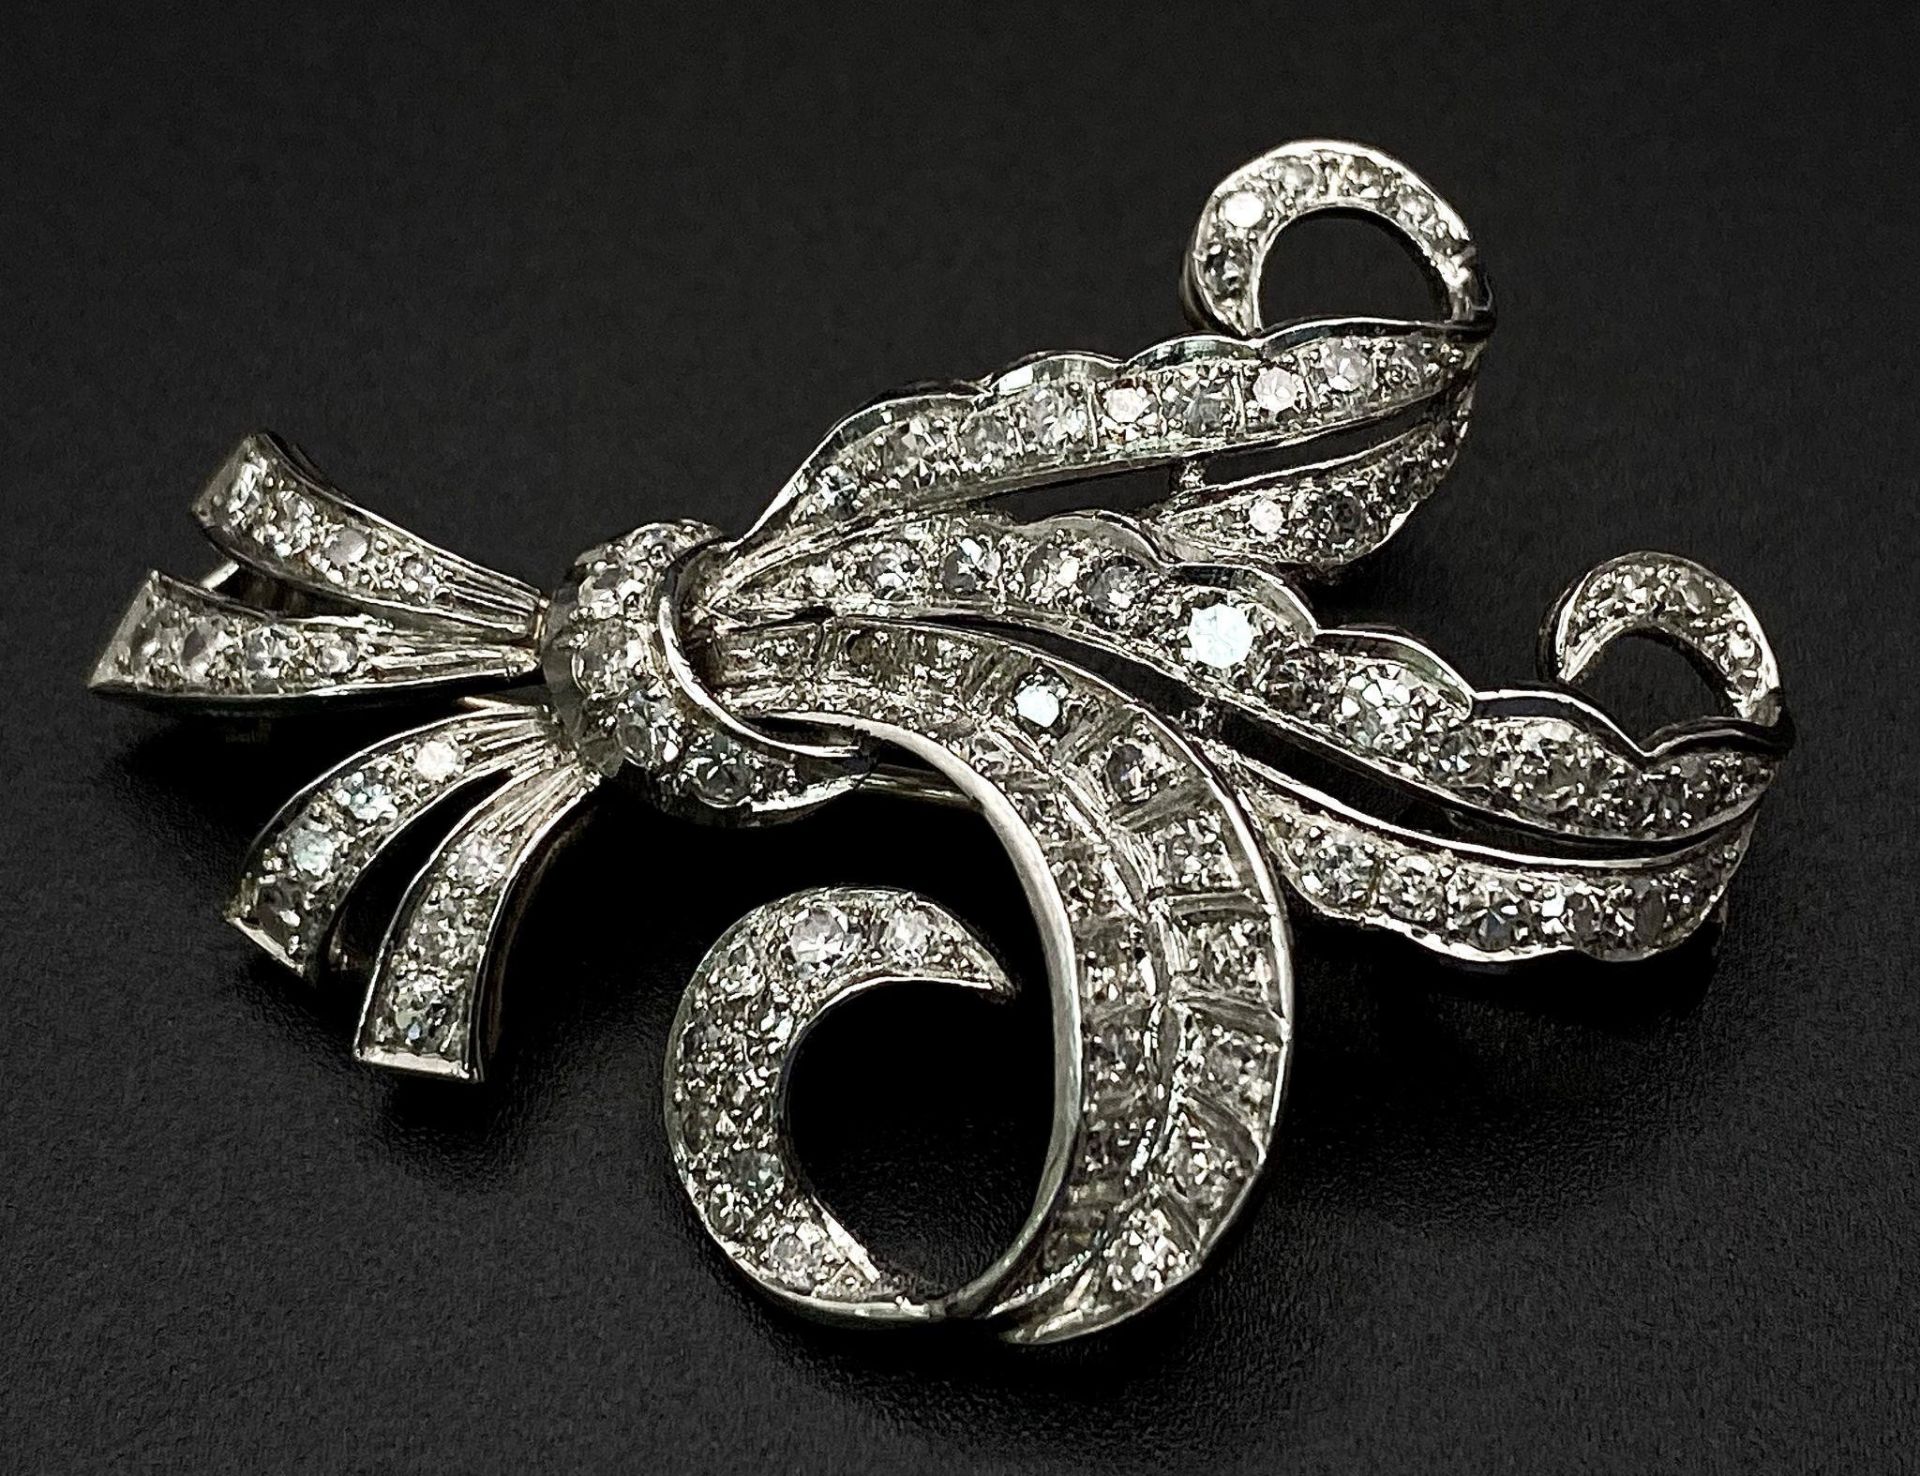 A Vintage Style Platinum and Diamond Elaborate Bow Brooch. 2.2ctw of encrusted diamonds. 10.7g total - Image 8 of 8